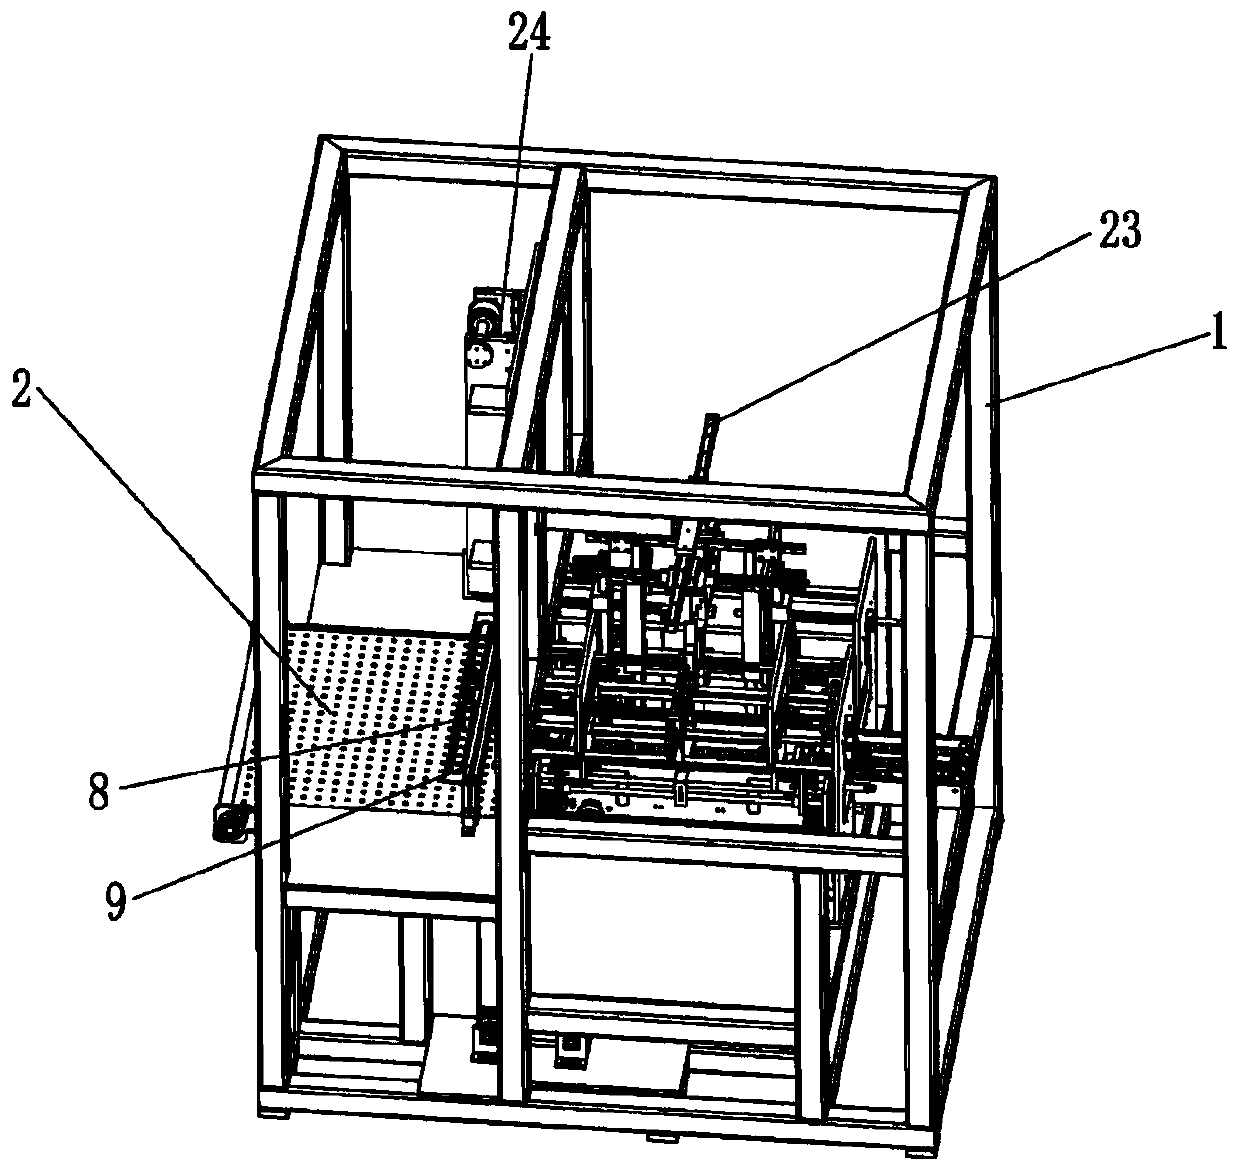 Corner-sticking-free mold-free lid and base box forming mechanism